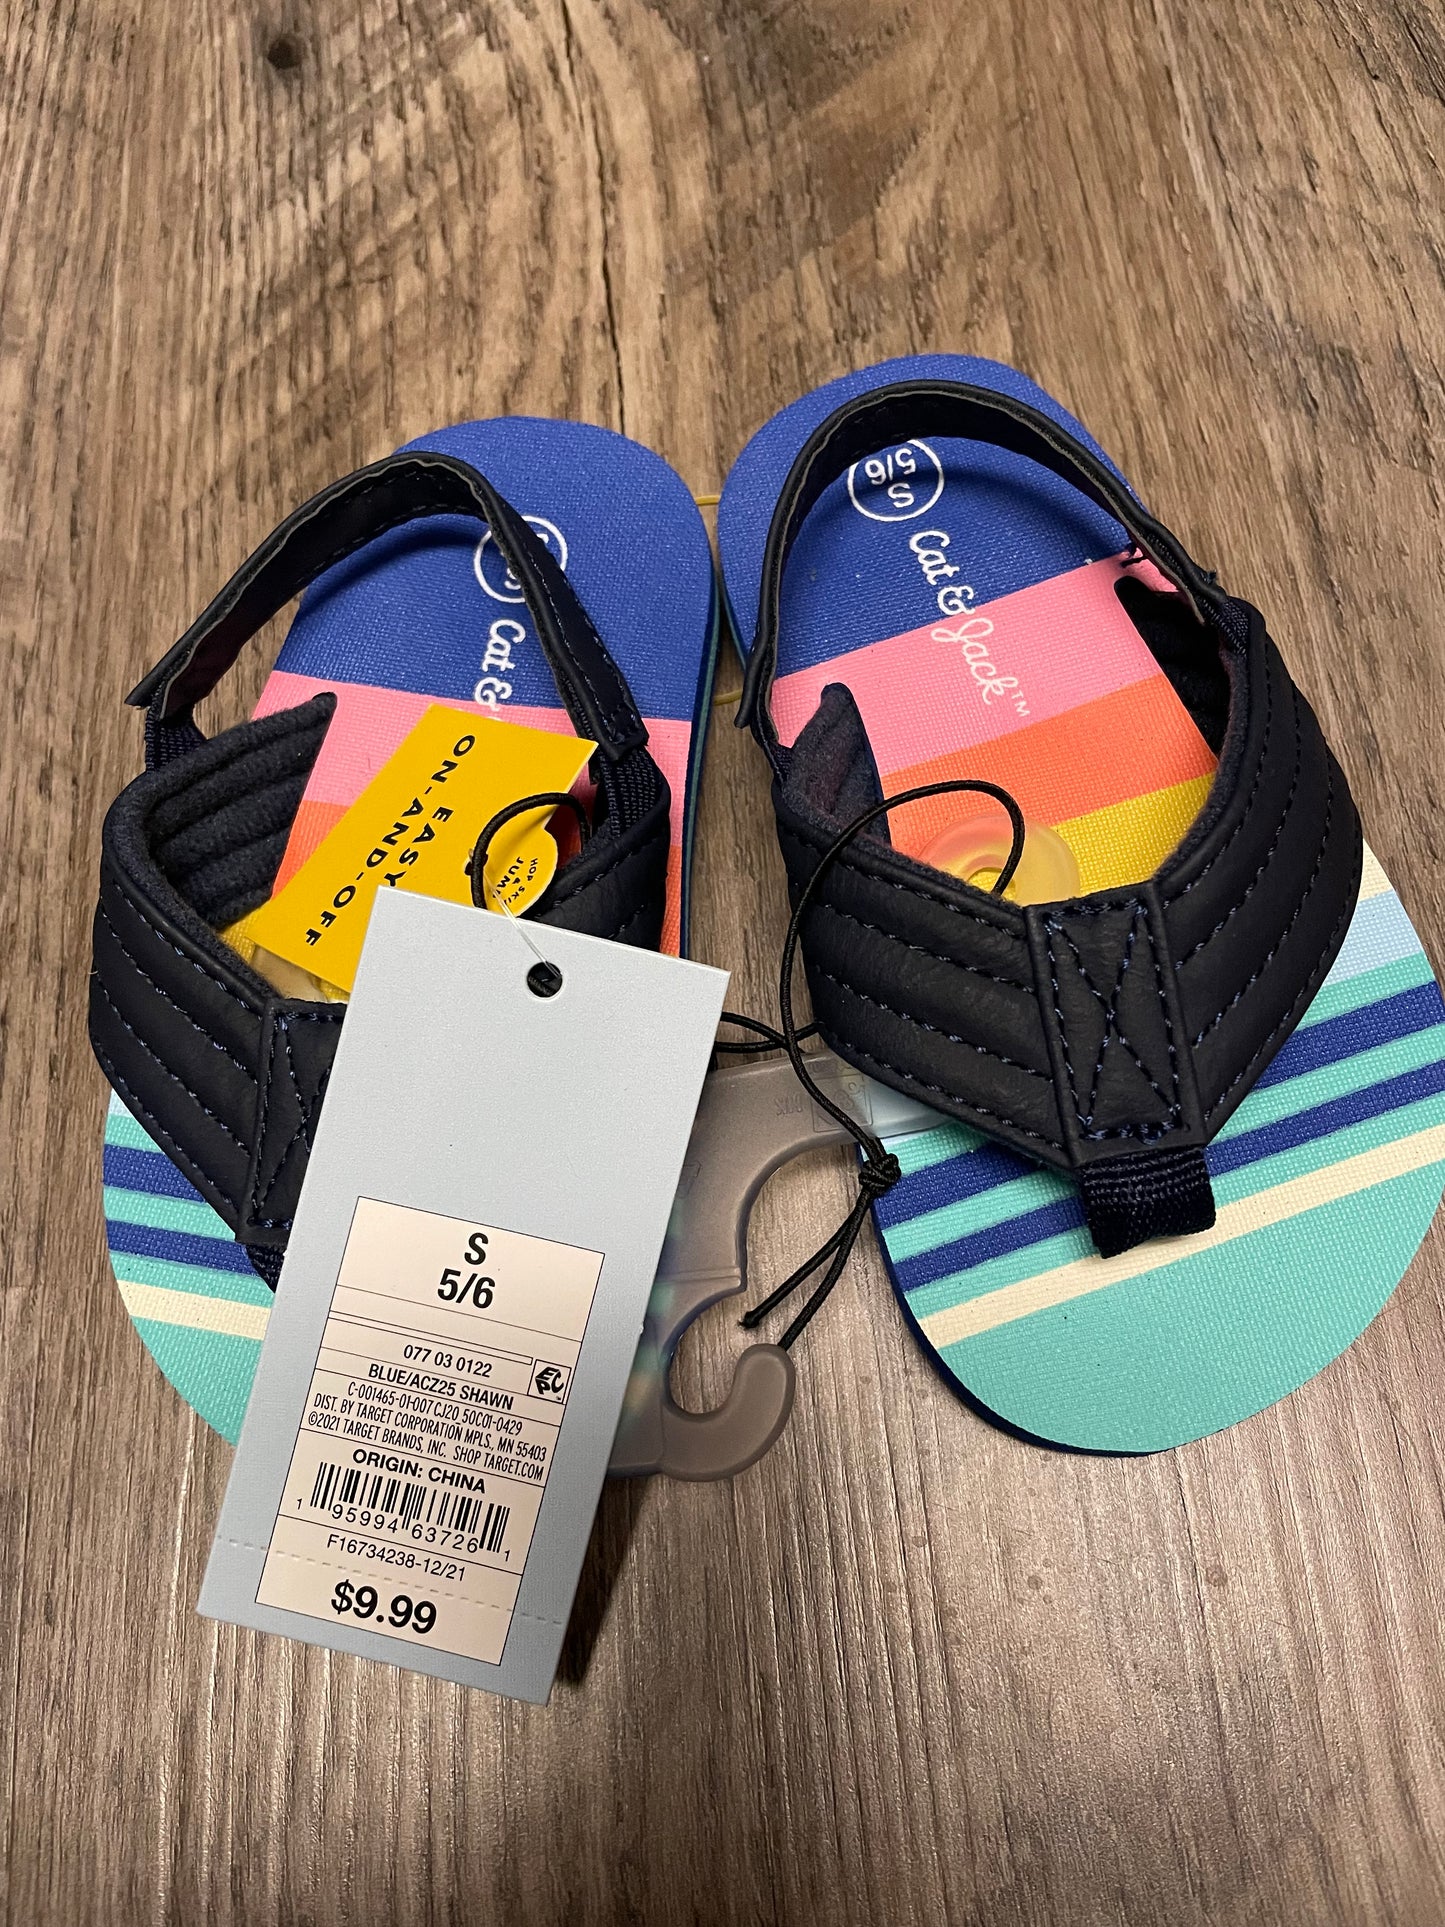 New toddler boy 5/6 small flip flop. Easy on and off